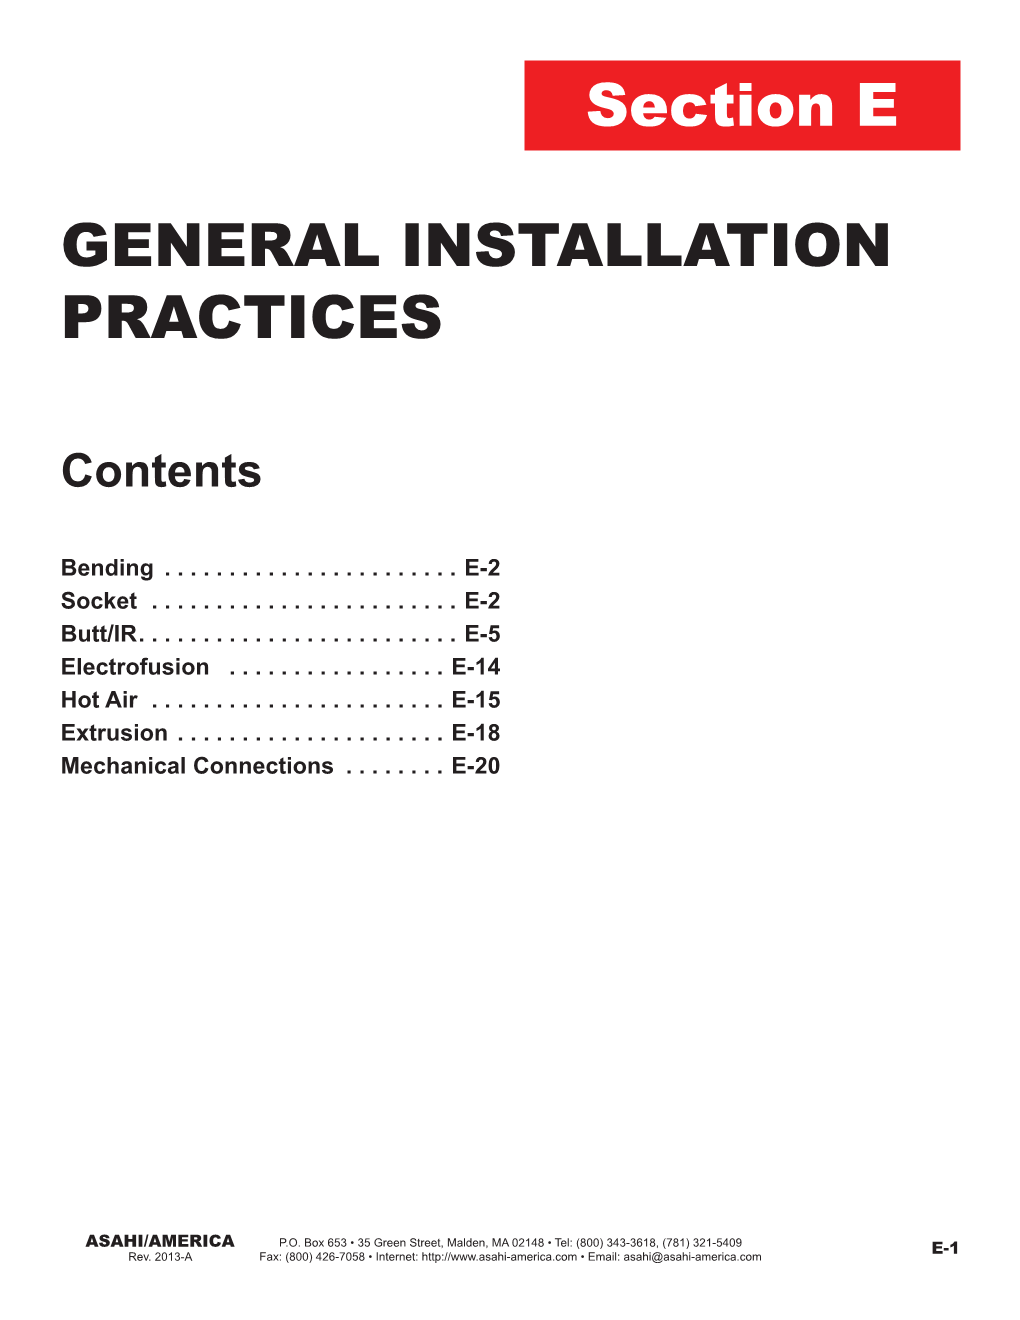 Section E GENERAL INSTALLATION PRACTICES